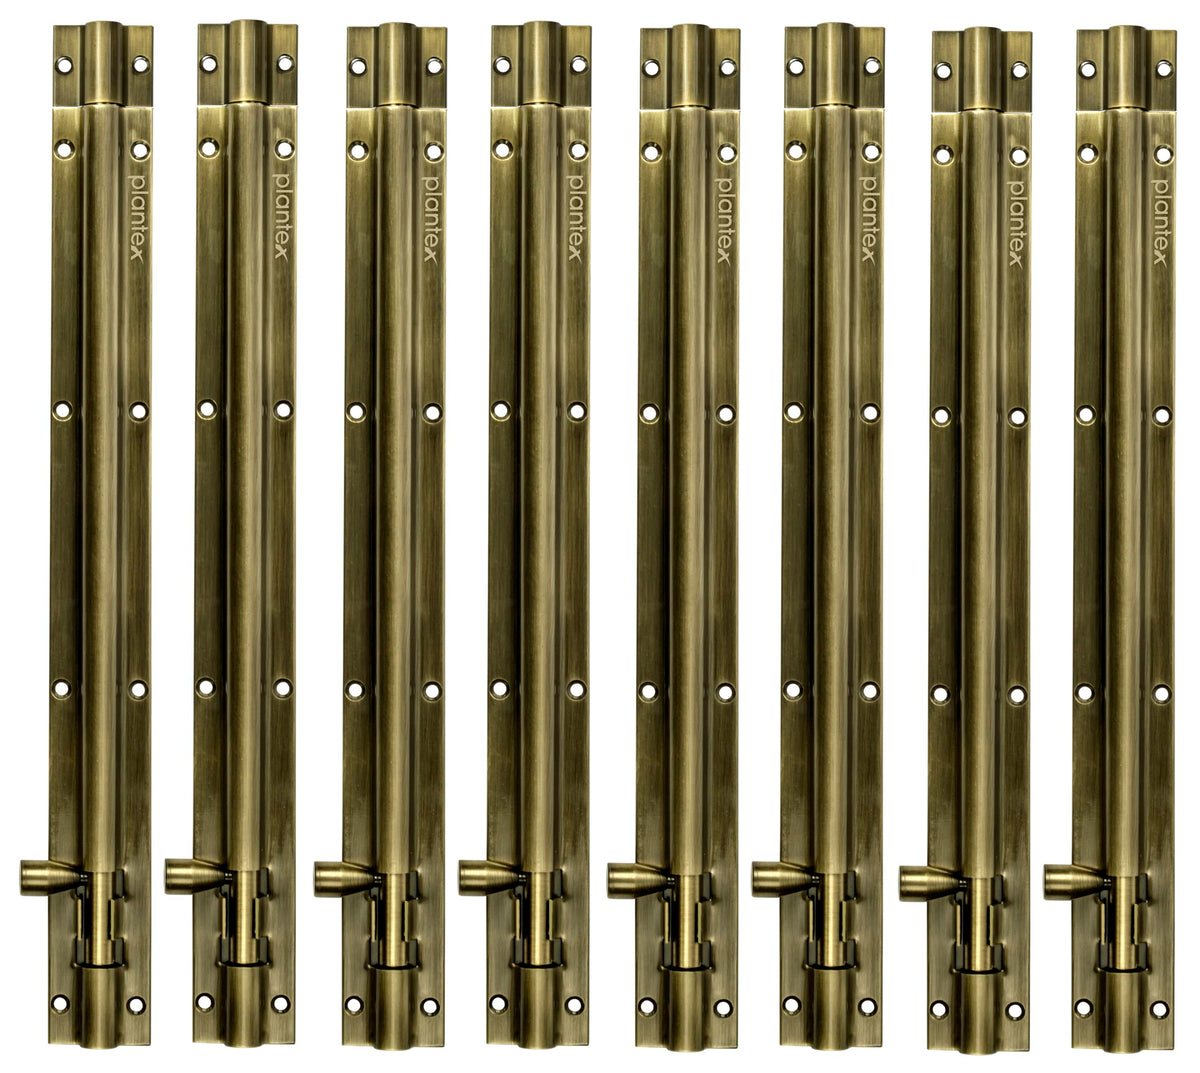 Plantex Antique Tower Bolt for Windows/Doors/Wardrobe - 12-inches (Pack of 8)